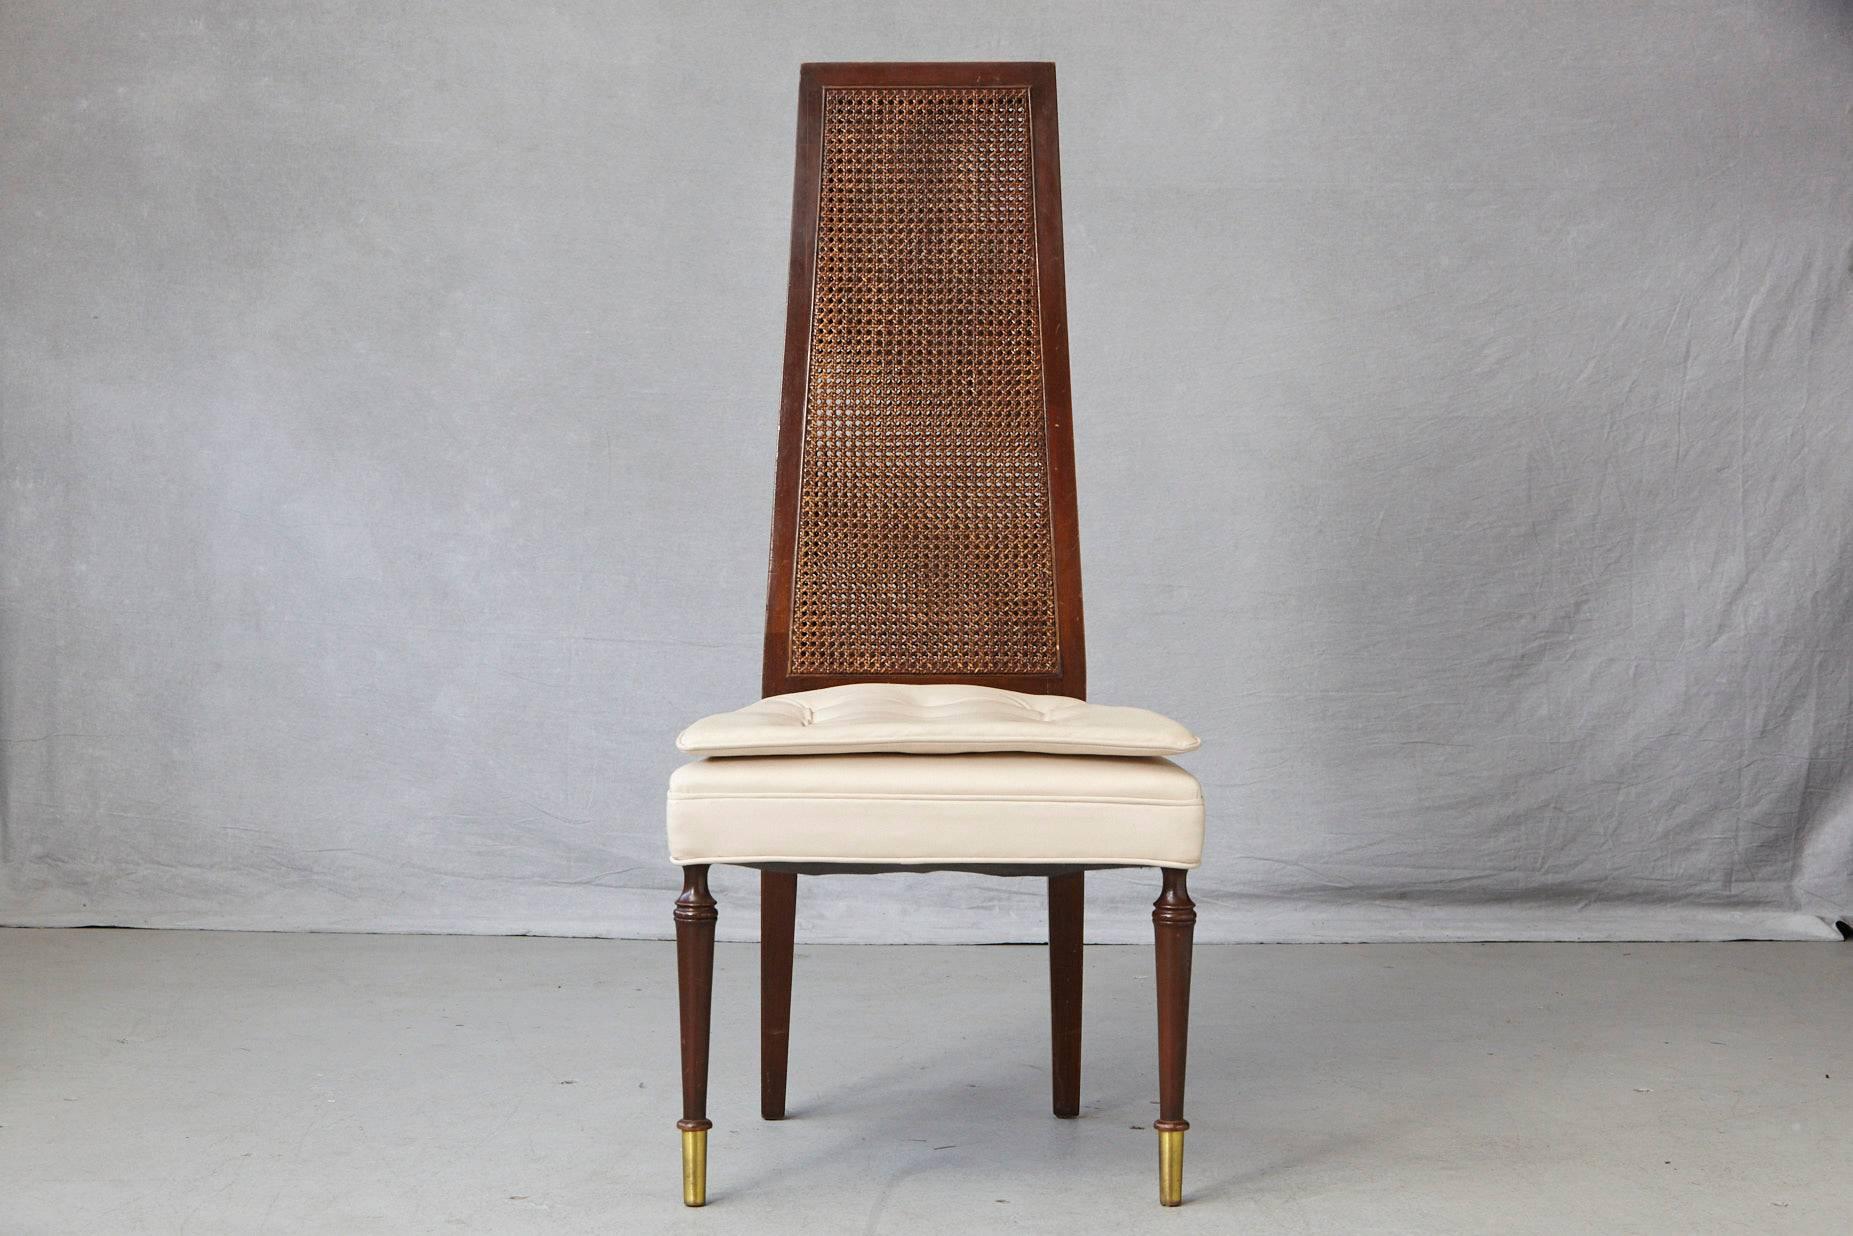 High back desk or side chair with a double-sided rattan back and a double seat cushion in beige faux leather, mounted on round legs with brass tips to the front and square legs with a slight splay in the back. The double-sided rattan back is in very